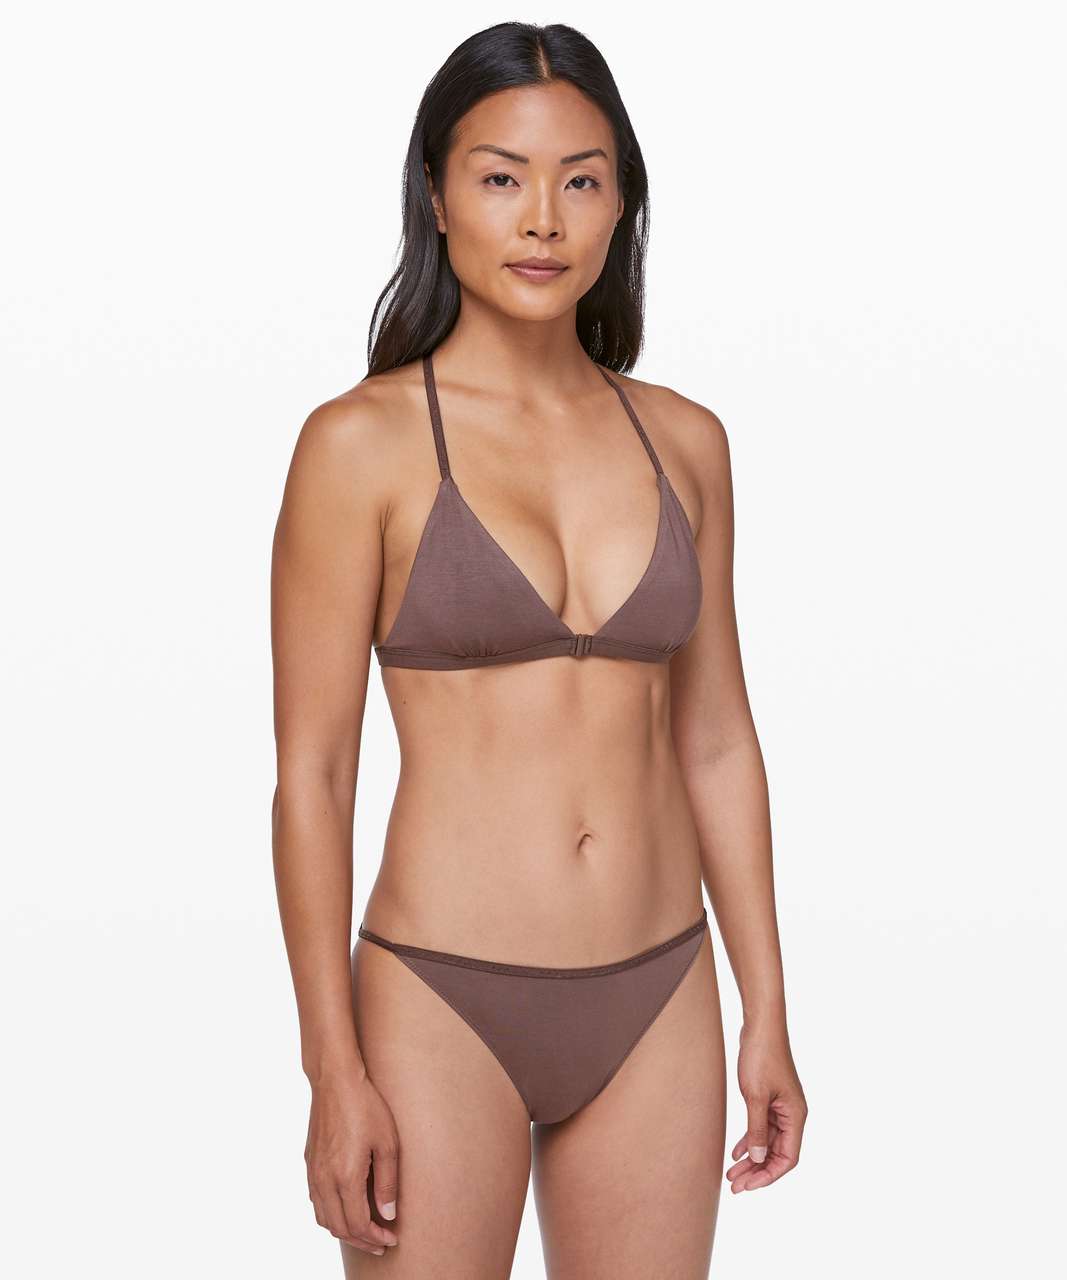 Lululemon Simply There Triangle Bralette - Cherry Cola